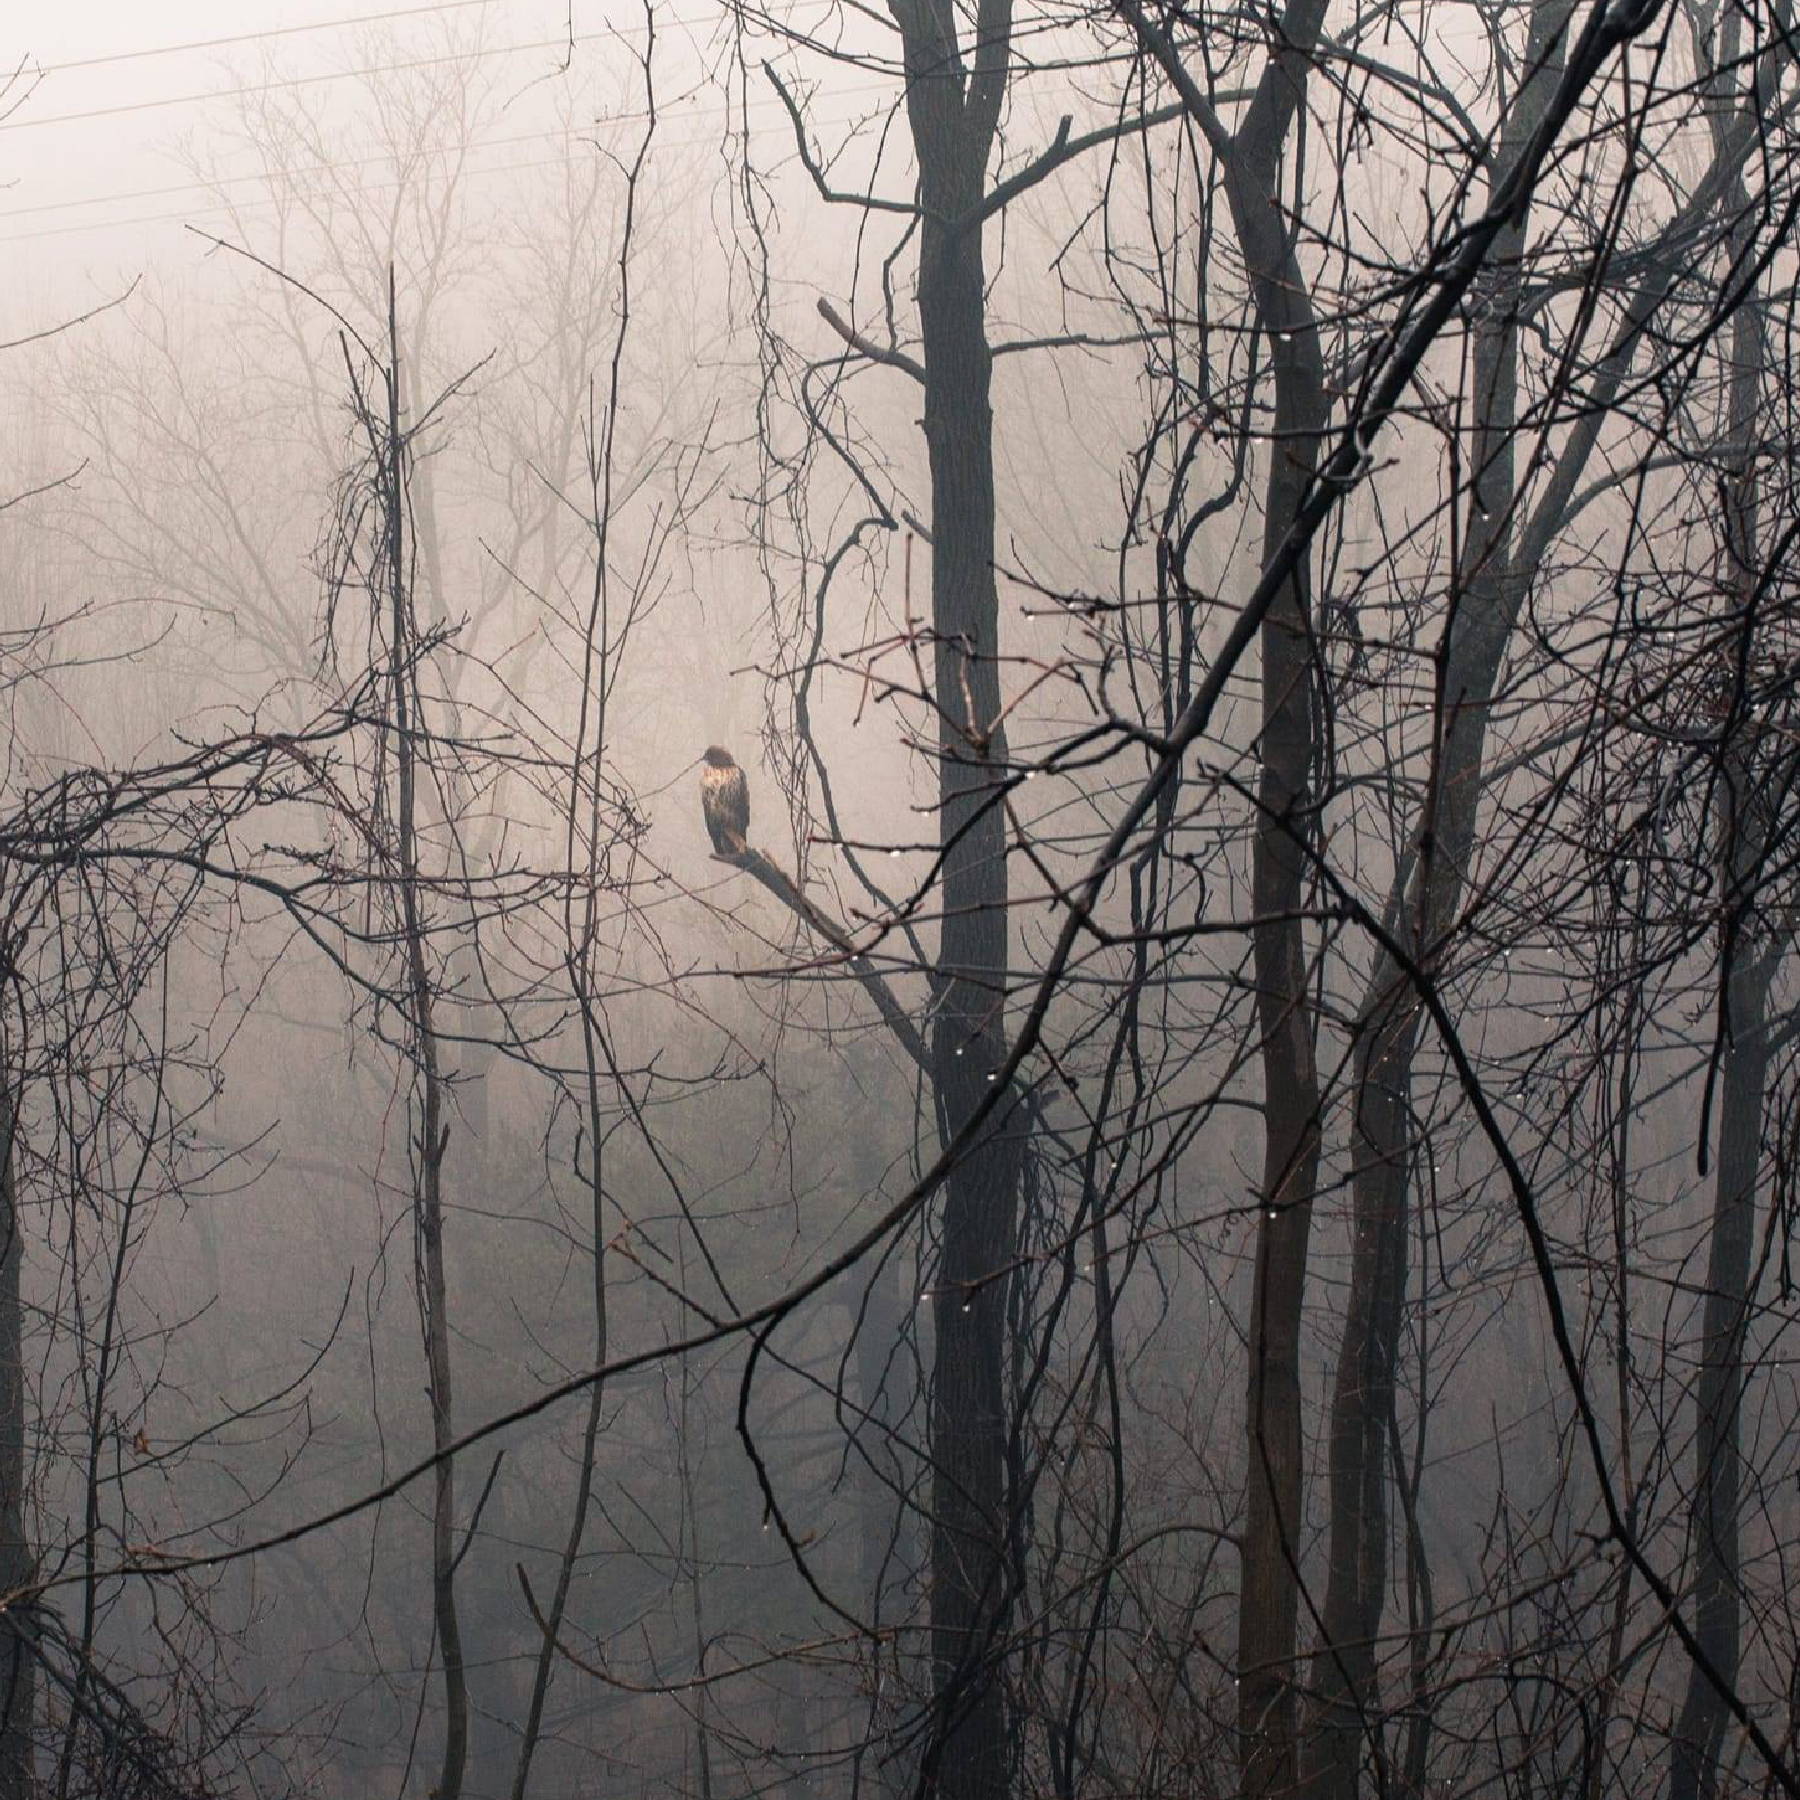  a bird on a tree in the middle of a foggy forest